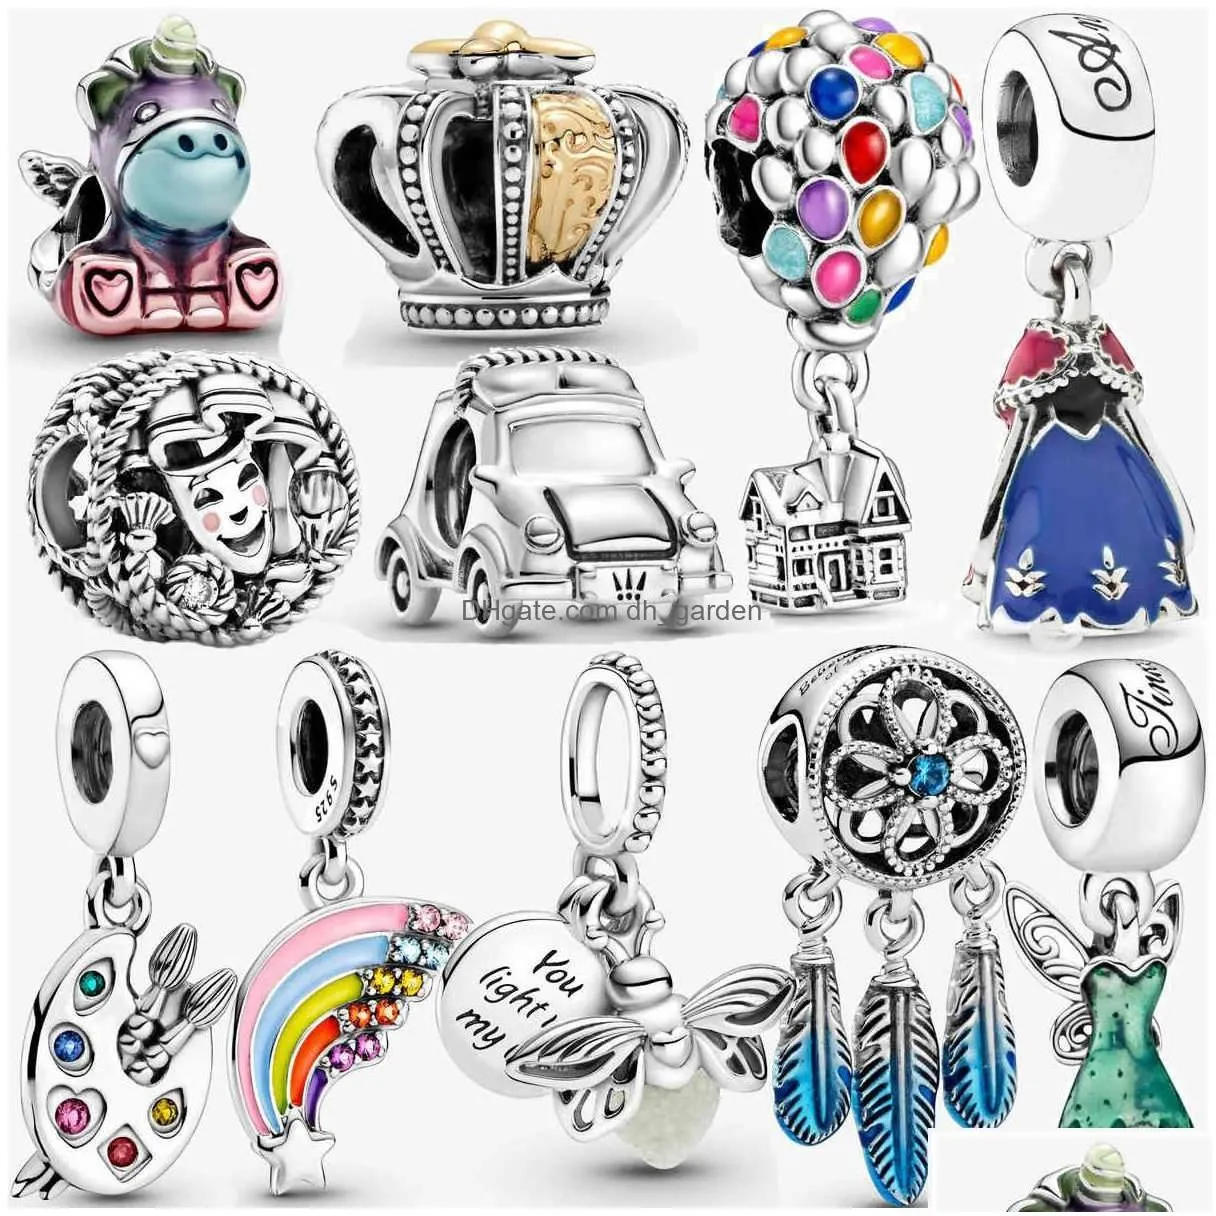 Charms 100 925 Sterling Sier Rainbow Charm Balloon Pendant Fit Original Bangle Bracelet Women Fine Jewelry Accessories Making Gift D